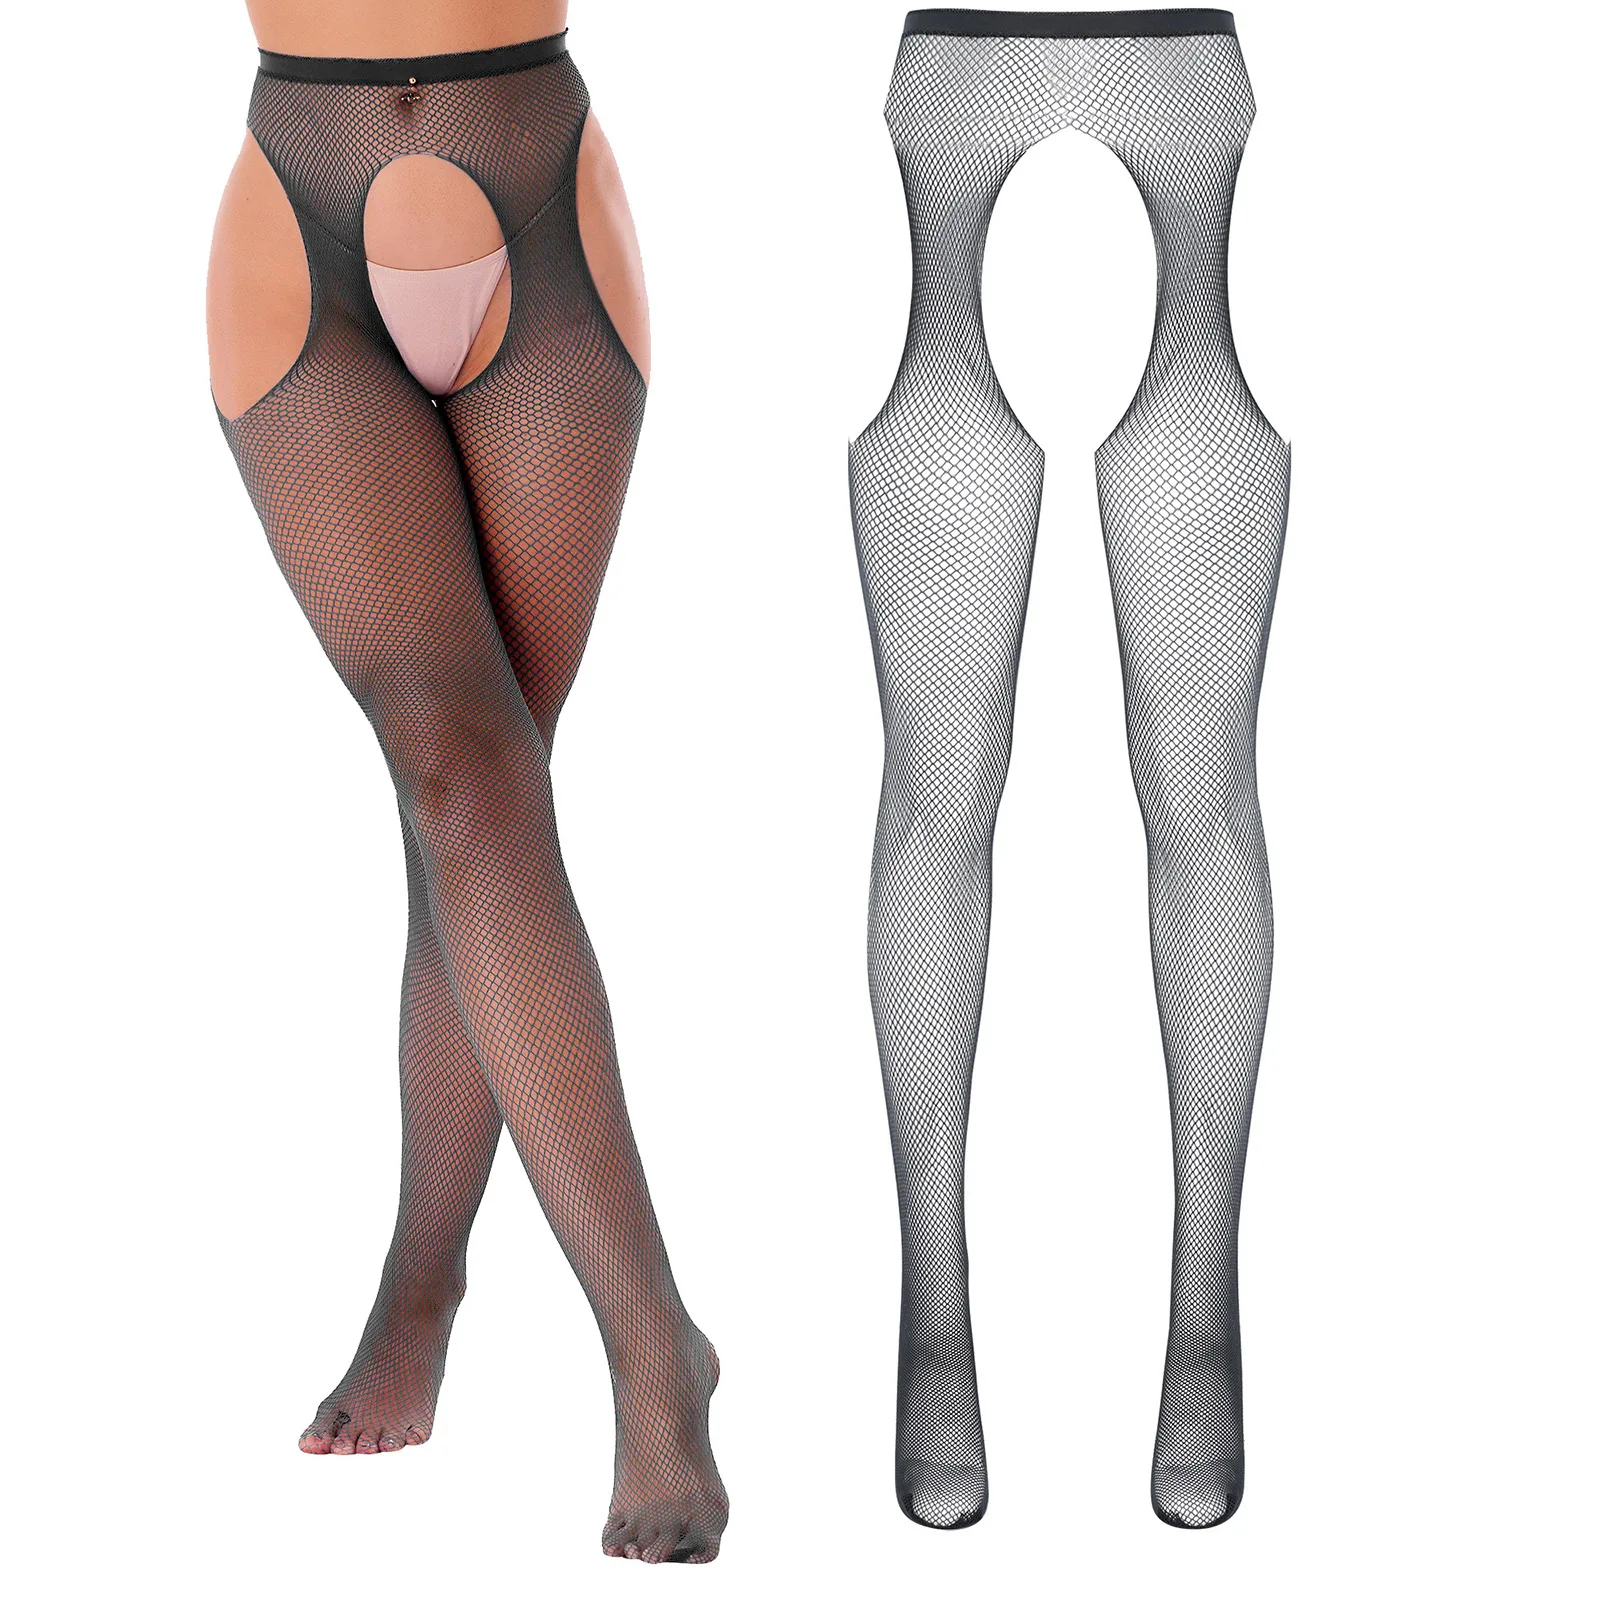 Womens Sexy Open Crotch Pantyhose Stockings Hollow Out Mid Waist Elastic Cutout Crotchless Leggings Underwear Erotic Lingerie sexy open crotch tights lingerie nylon silk stockings for women lady seamless crotchless pantyhose collant femme dropshipping